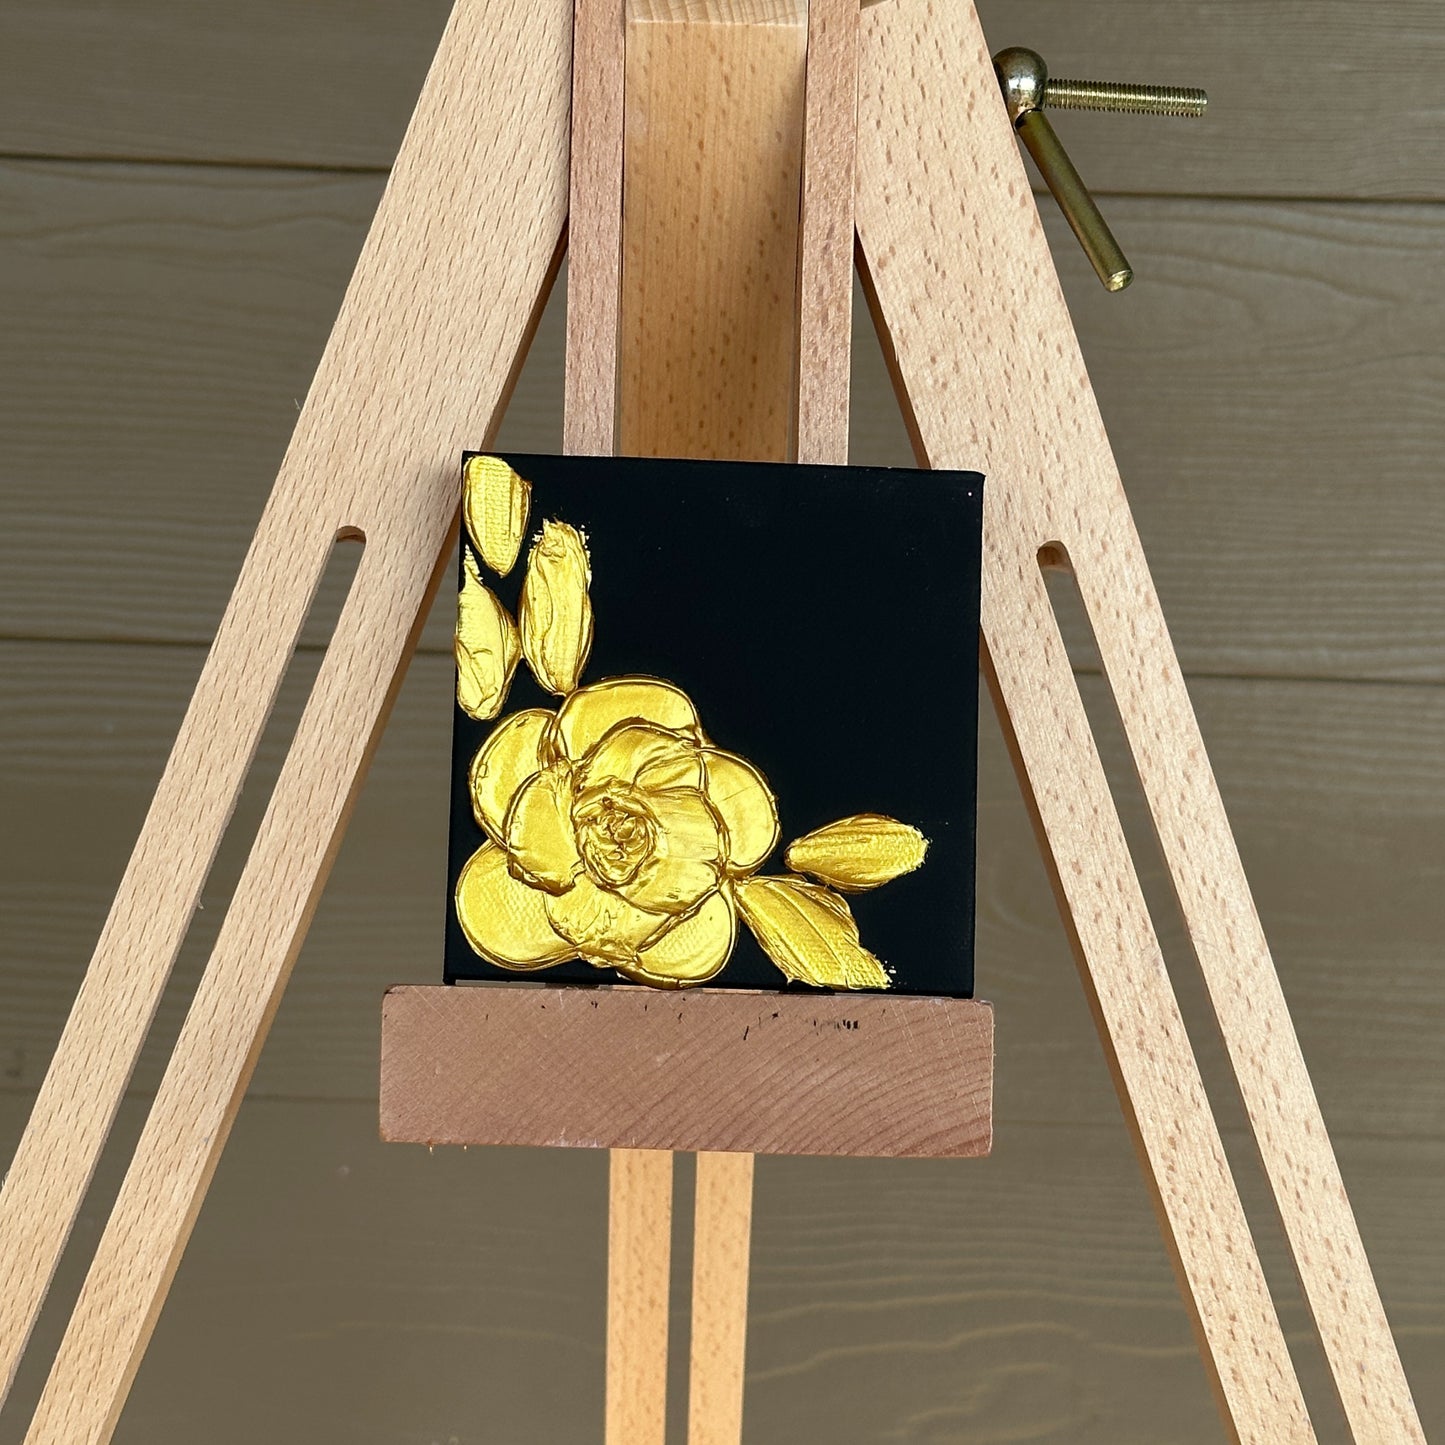 3D Texture Gold Pearl Rose on Black 4"x4"